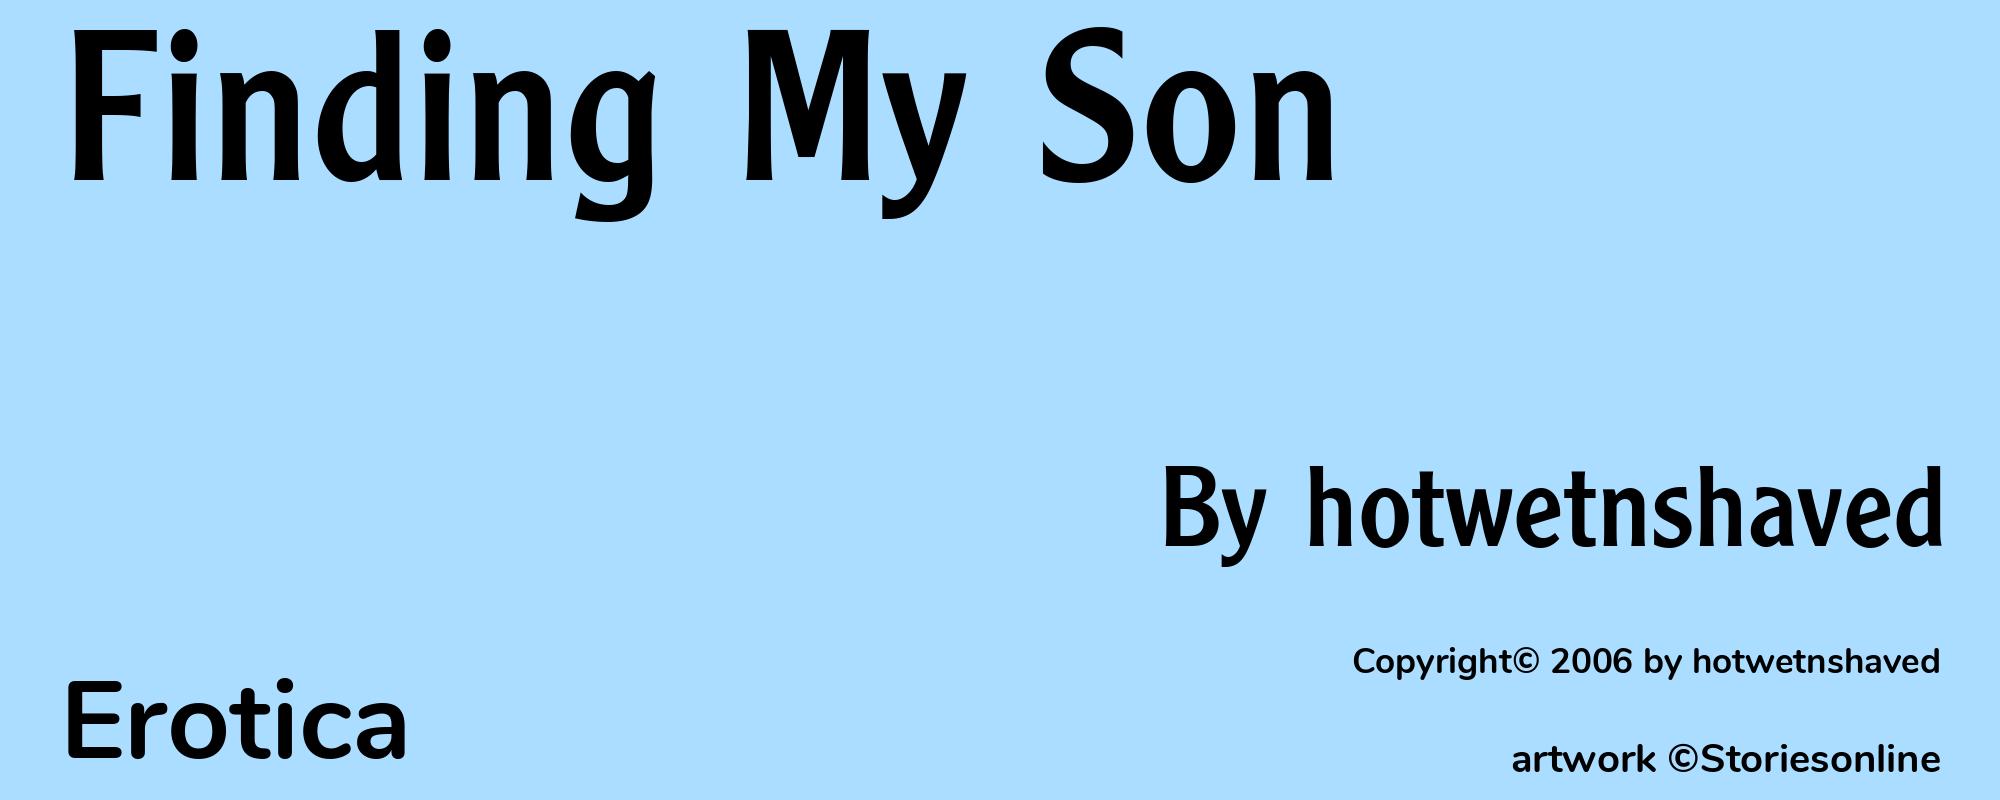 Finding My Son - Cover